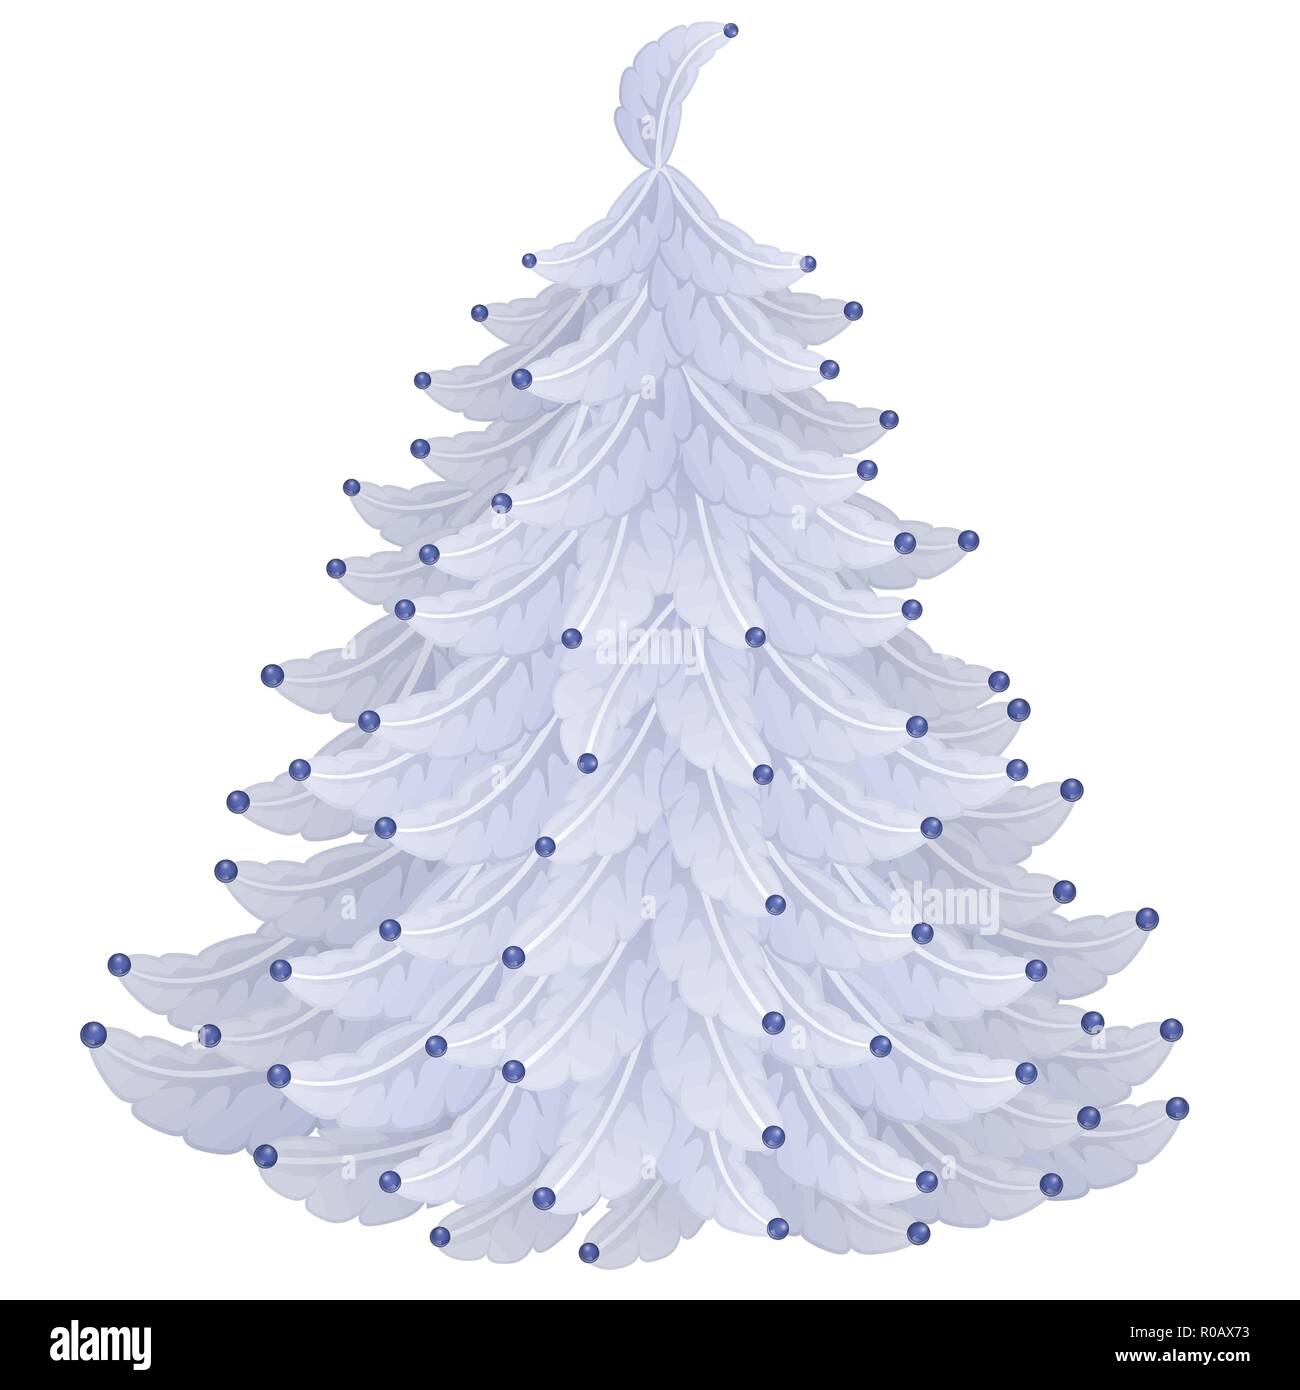 Christmas tree made of fluffy feathers isolated on white background. Vector illustration. Stock Vector